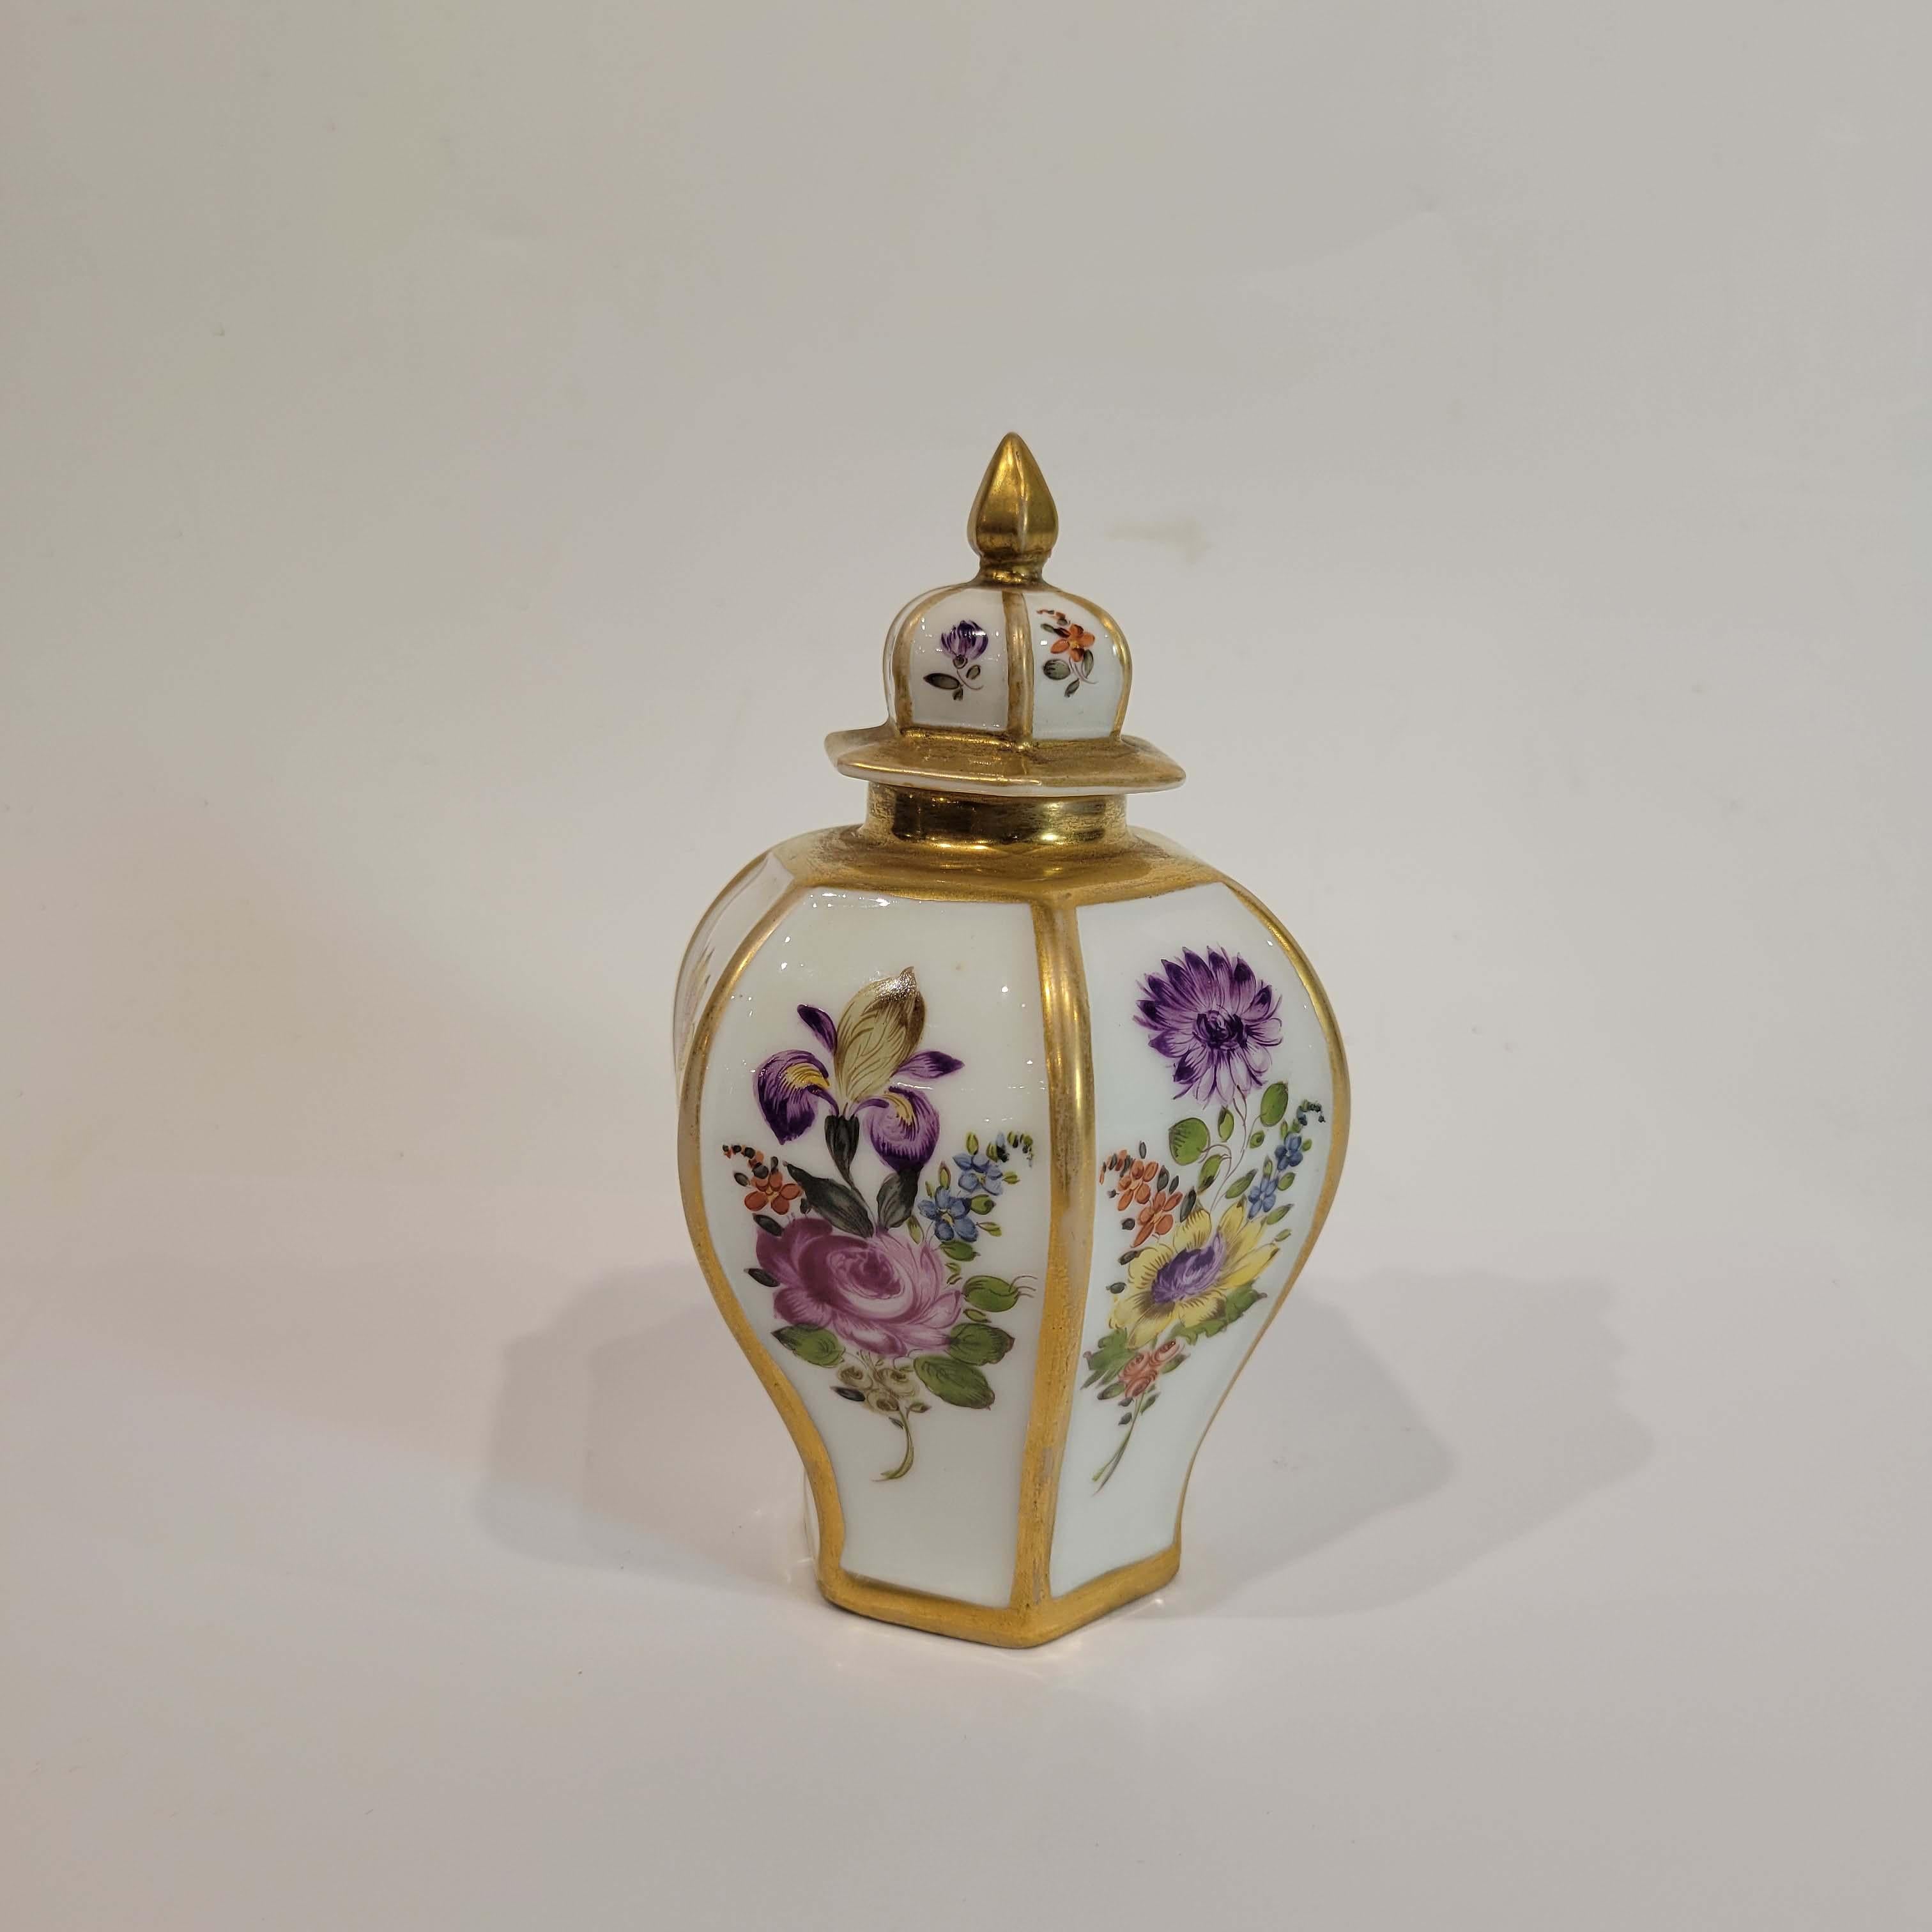 Beautifully hand painted and gilded in Meissen manner, circa mid to late 19th century is this porcelain tea caddy in great condition.
Underglazed blue markings underneath.